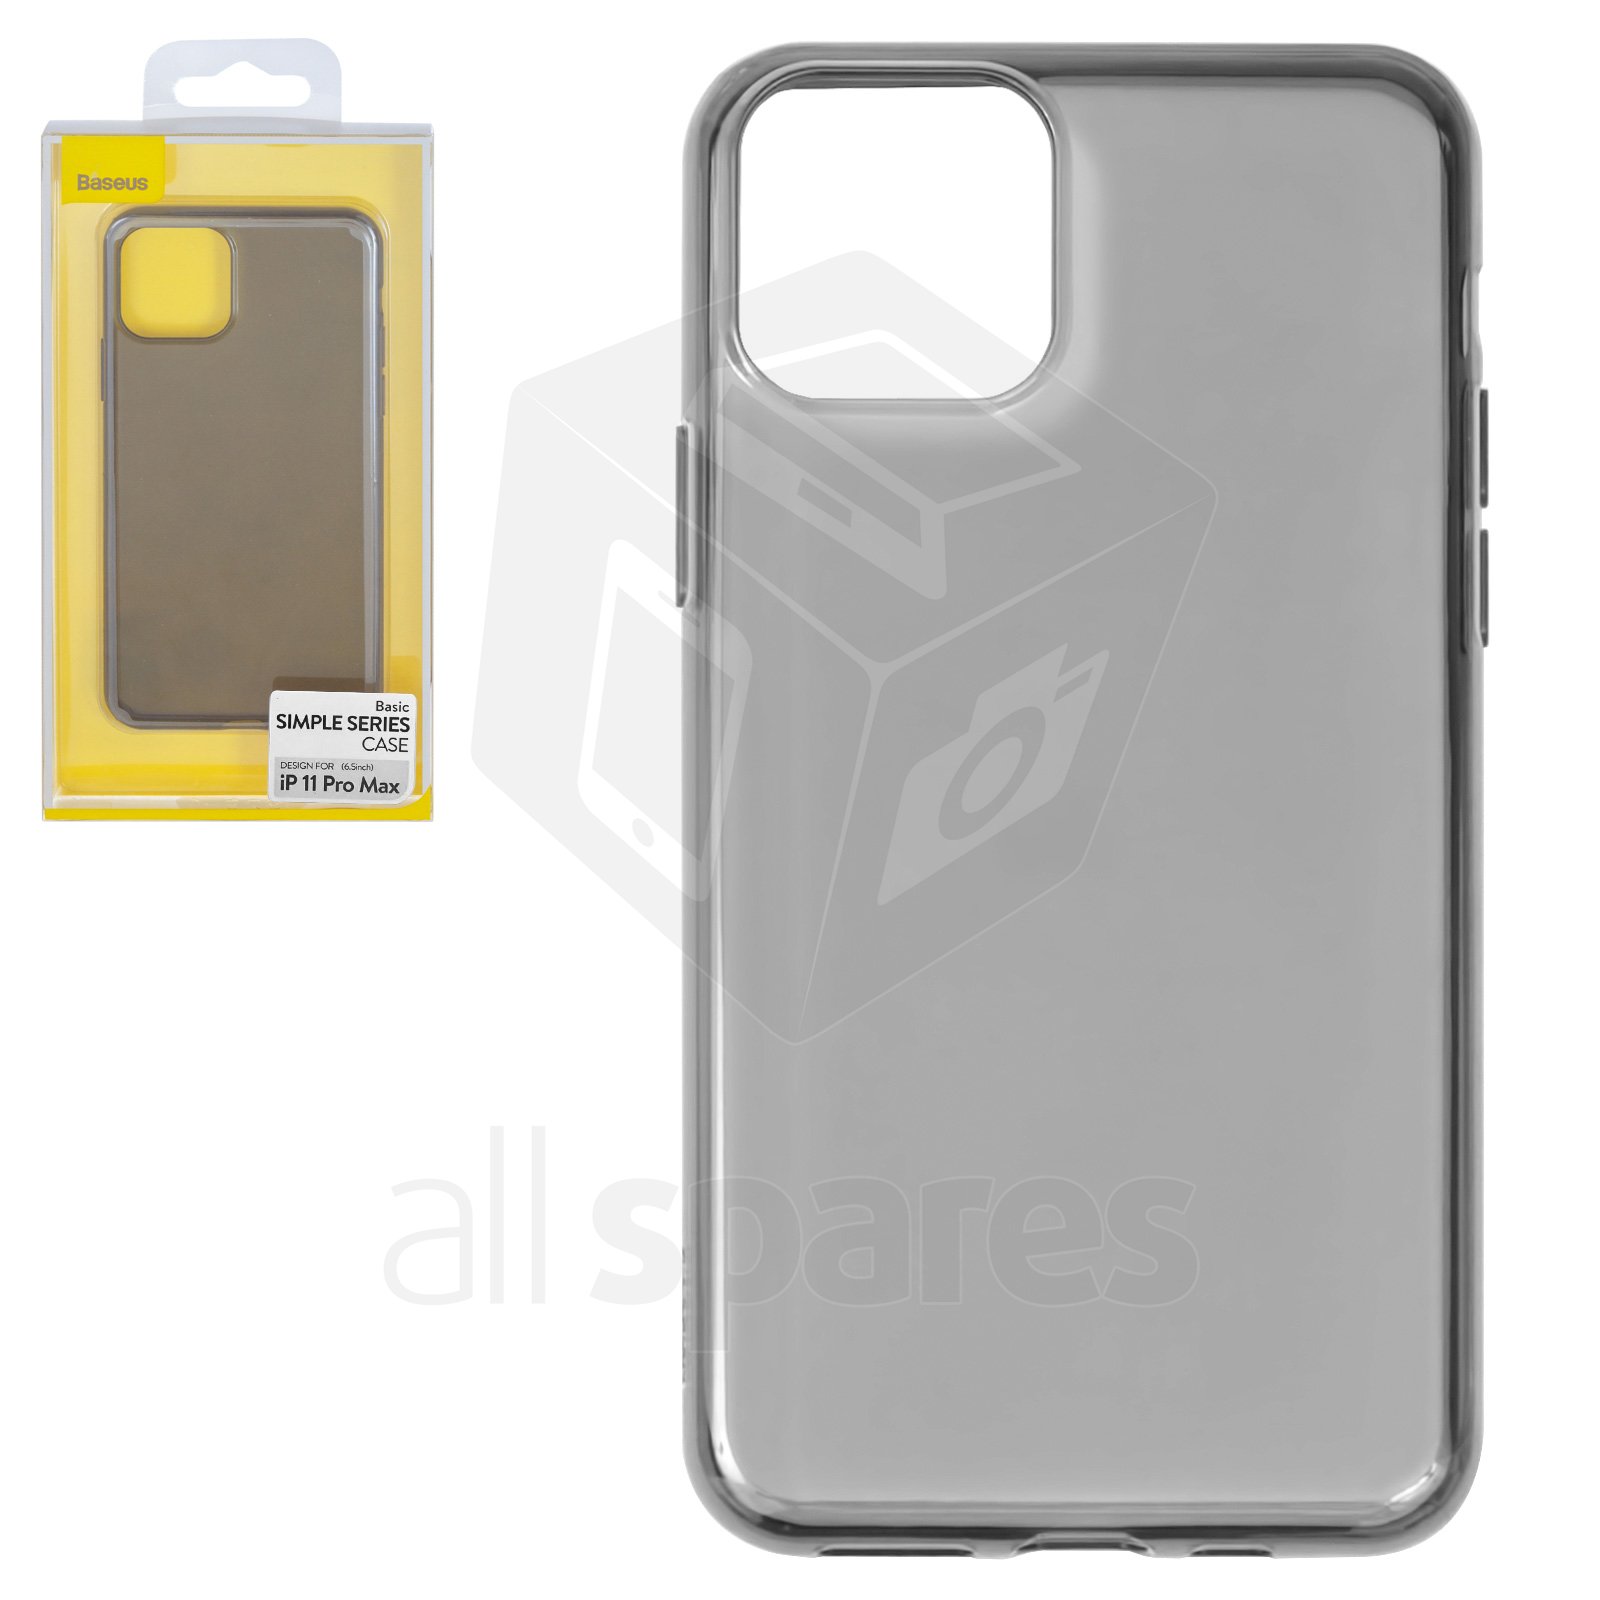 Case Baseus Compatible With Iphone 11 Pro Max Black Transparent Silicone Arapiph65s 01 All Spares